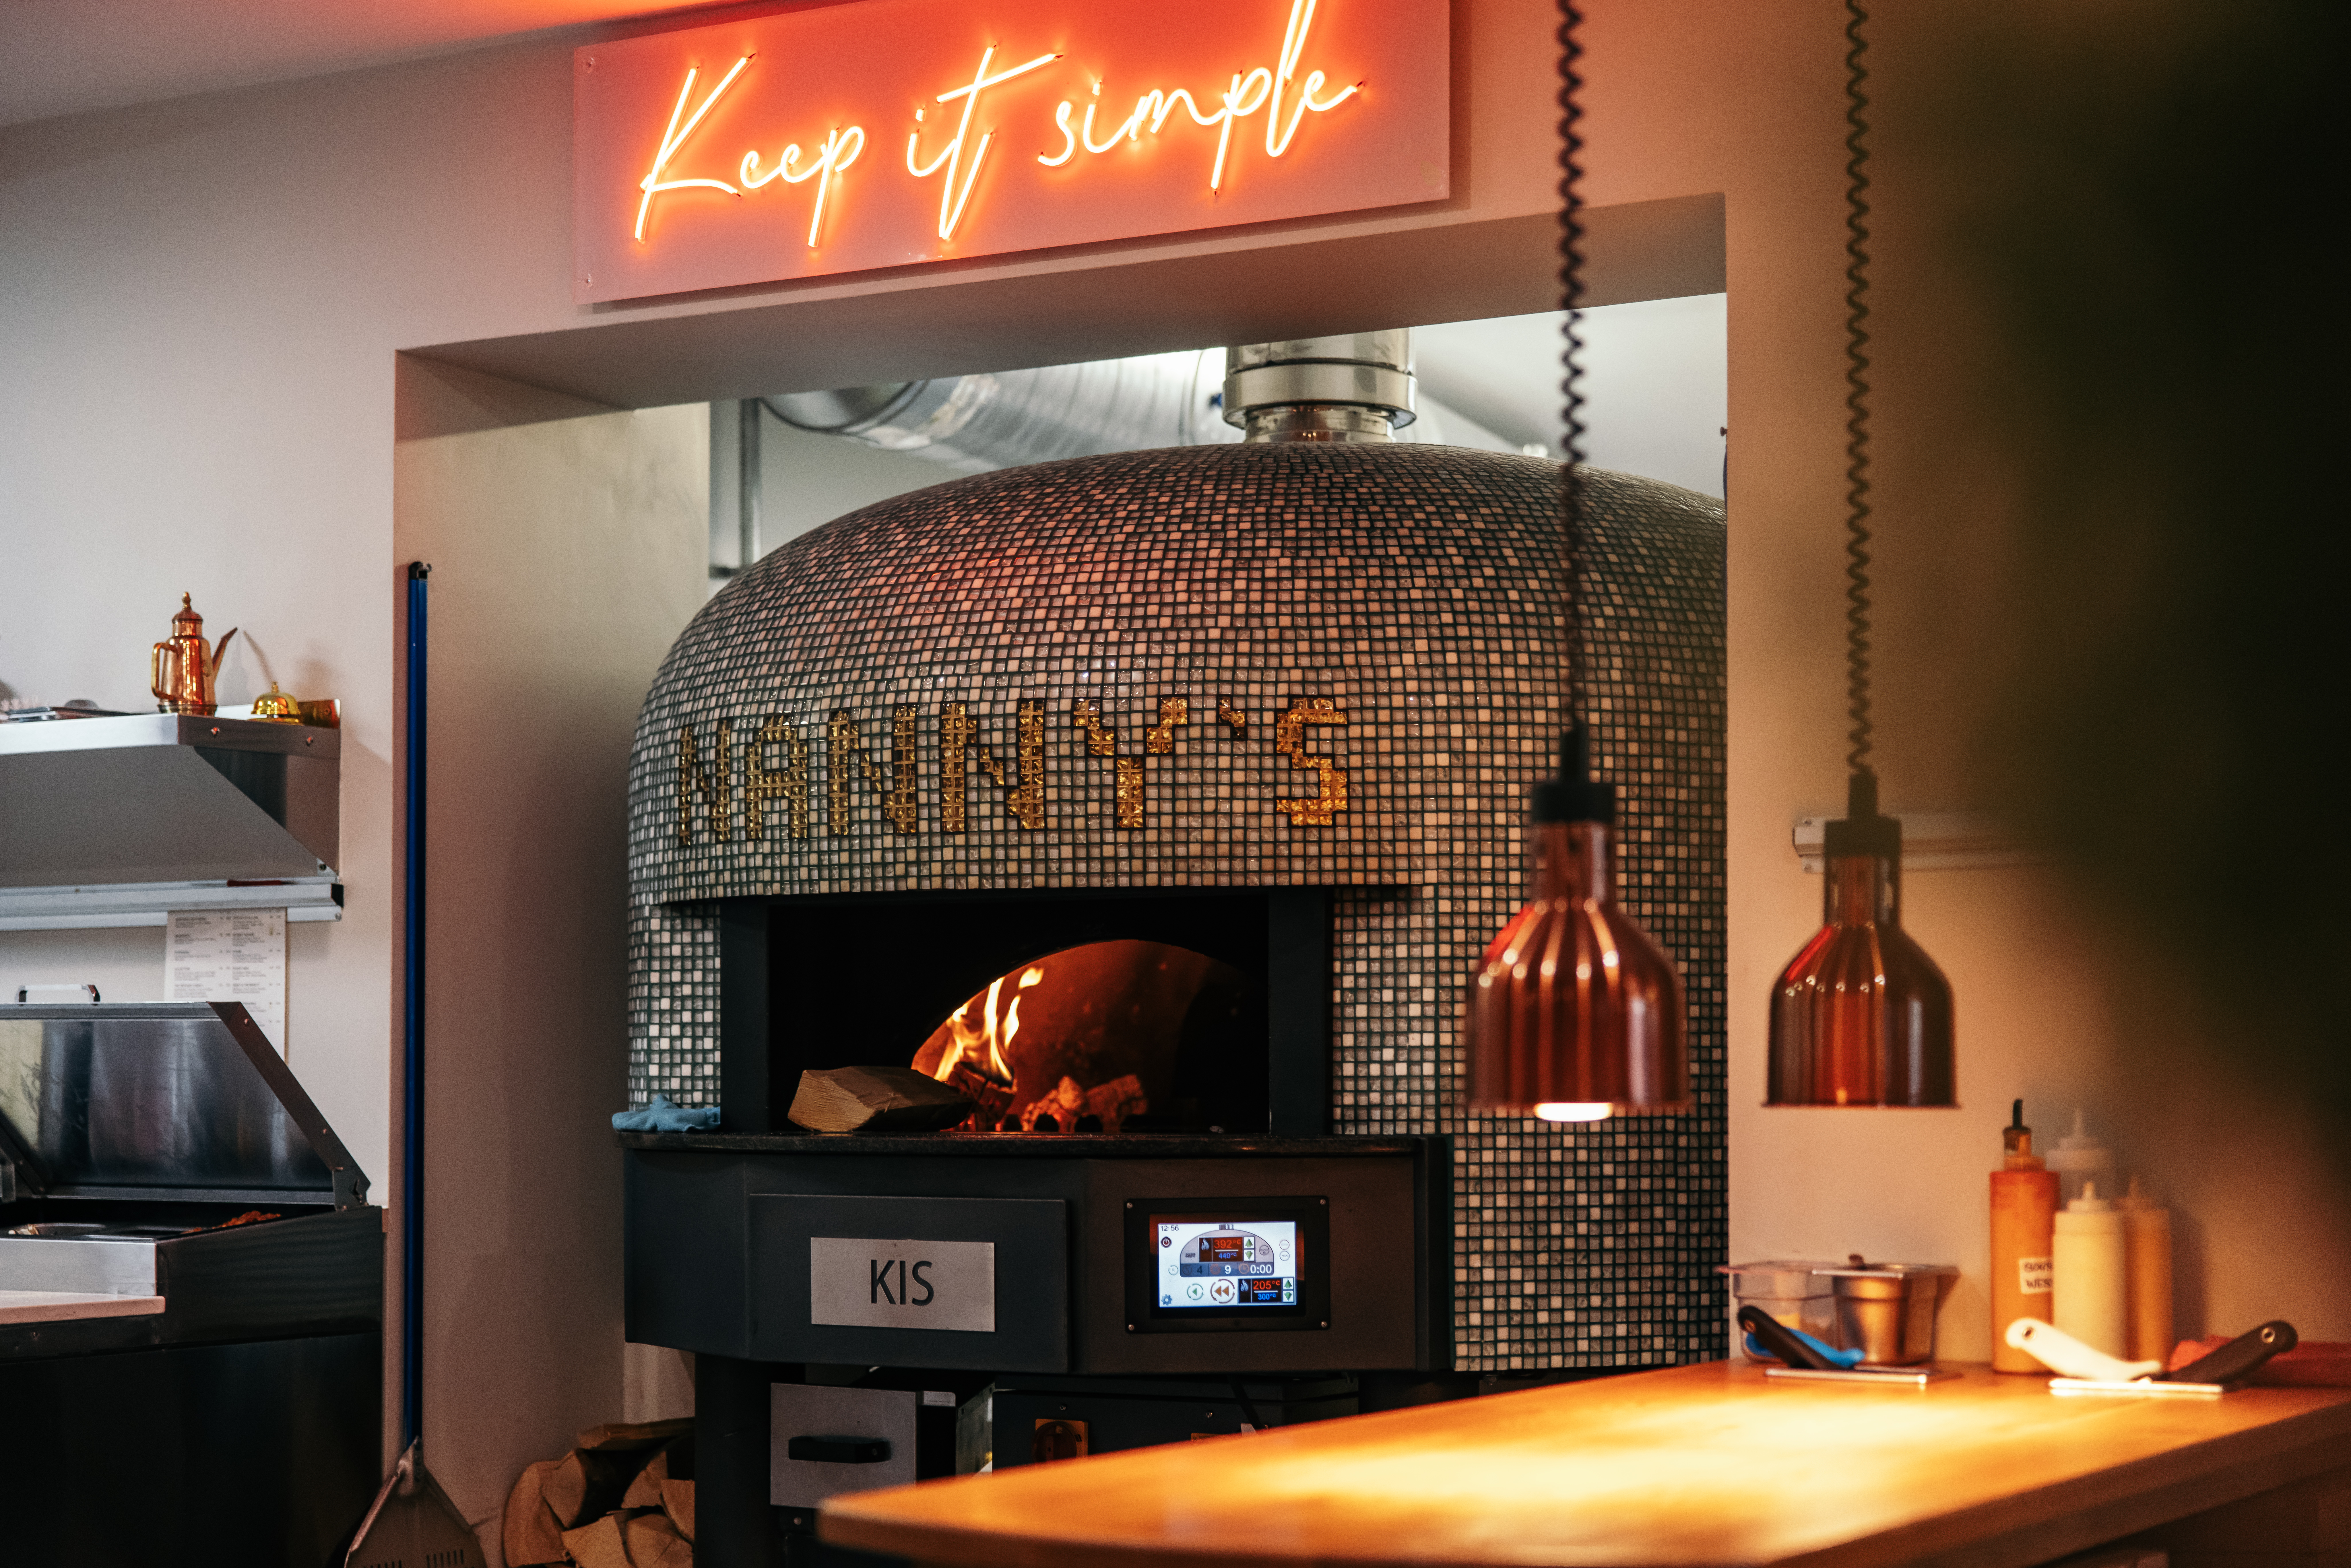 Pizza oven with a sign that says 'Keep It Simple' above it.